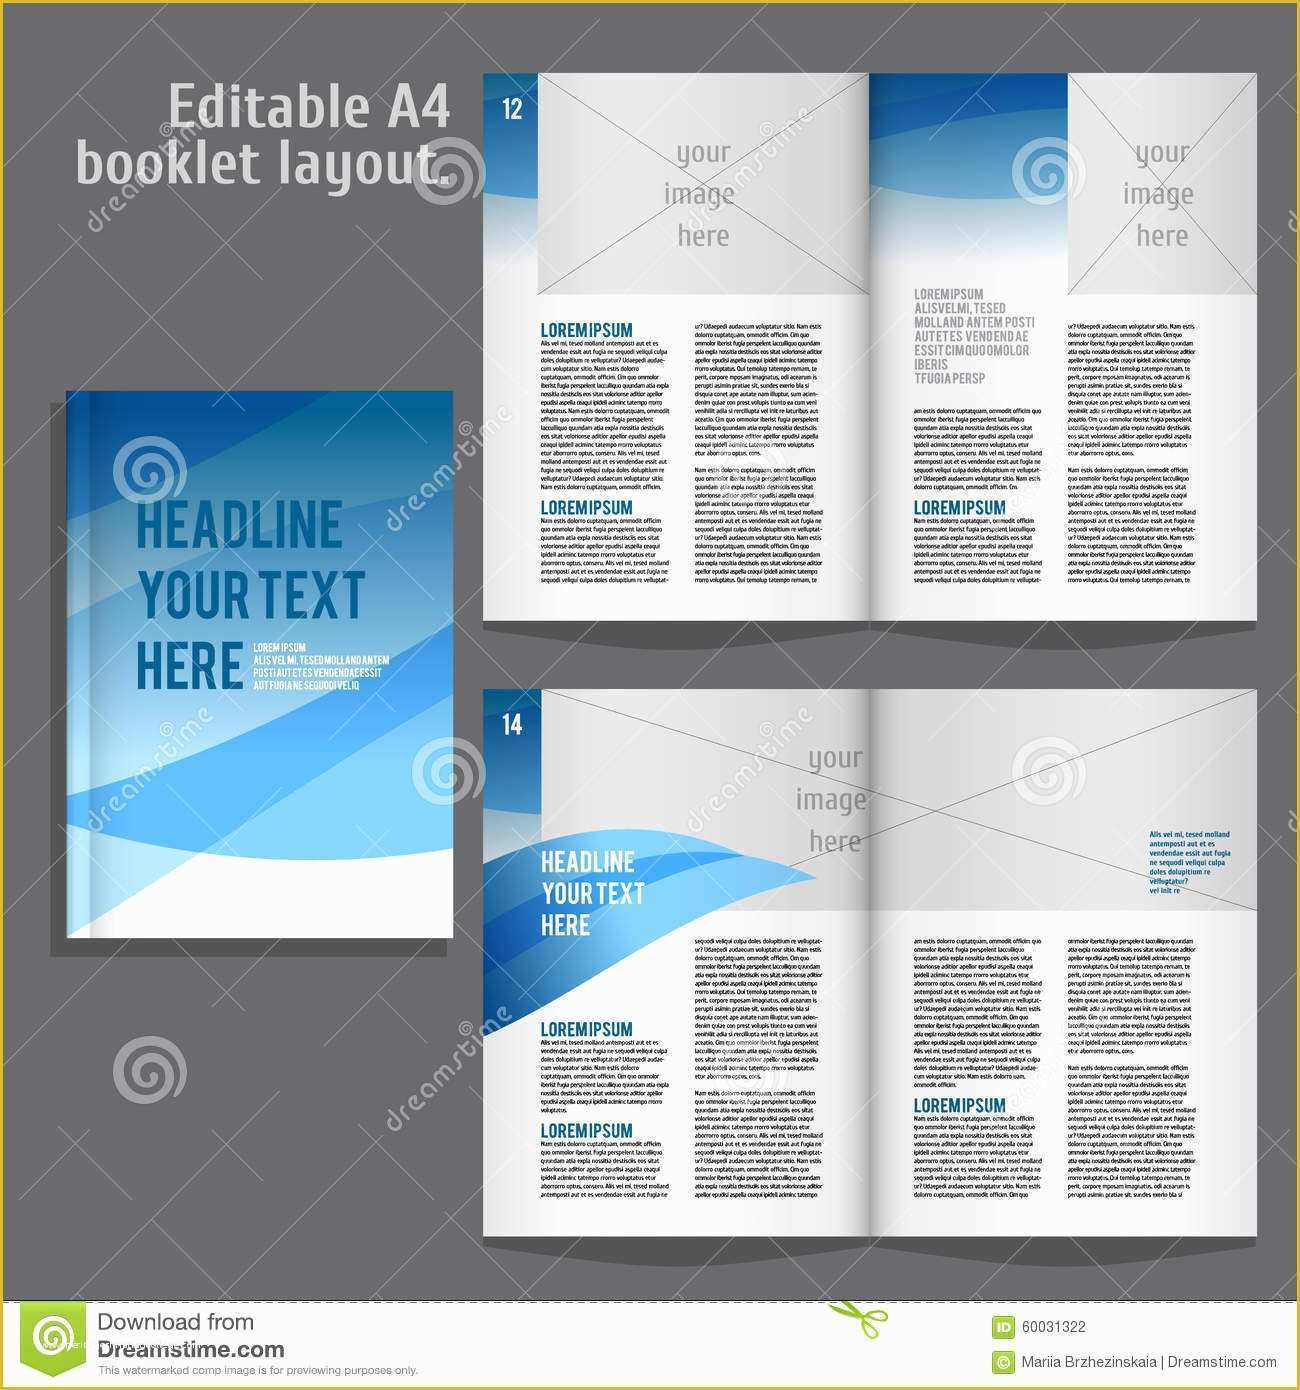 Photo Book Layout Templates Free Of A4 Book Layout Design Template Stock Vector Image